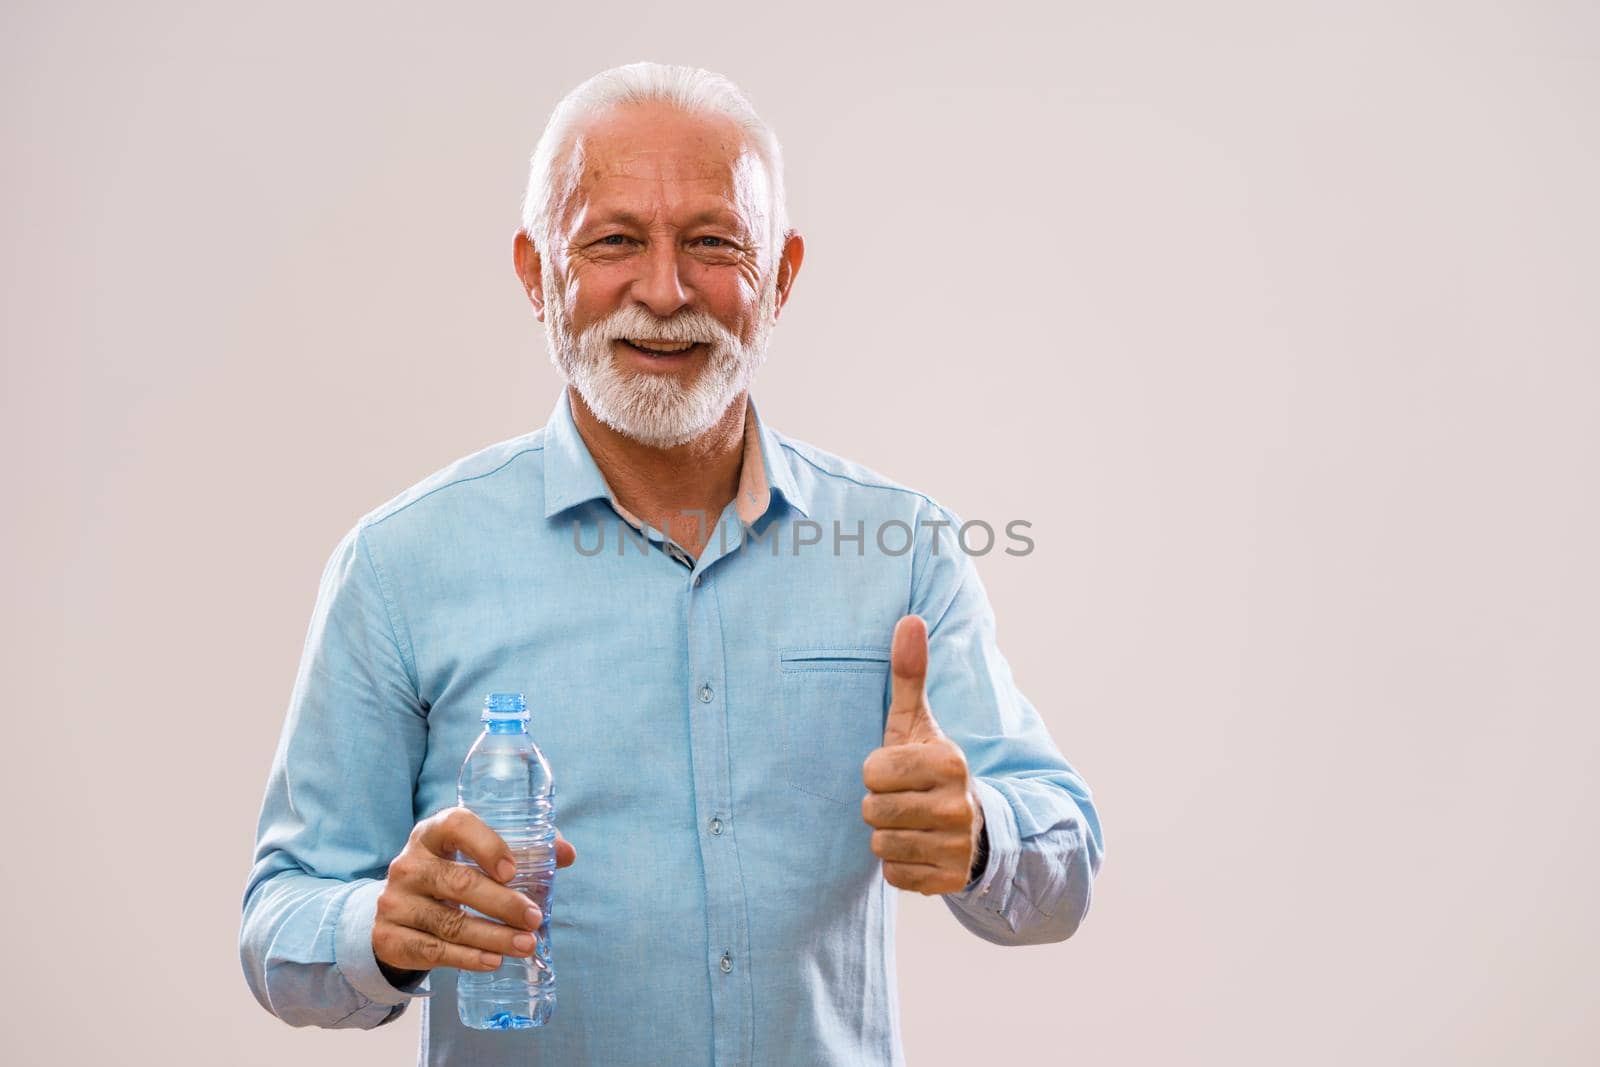 Portrait of cheerful senior man who is holding bottle of water and smiling.